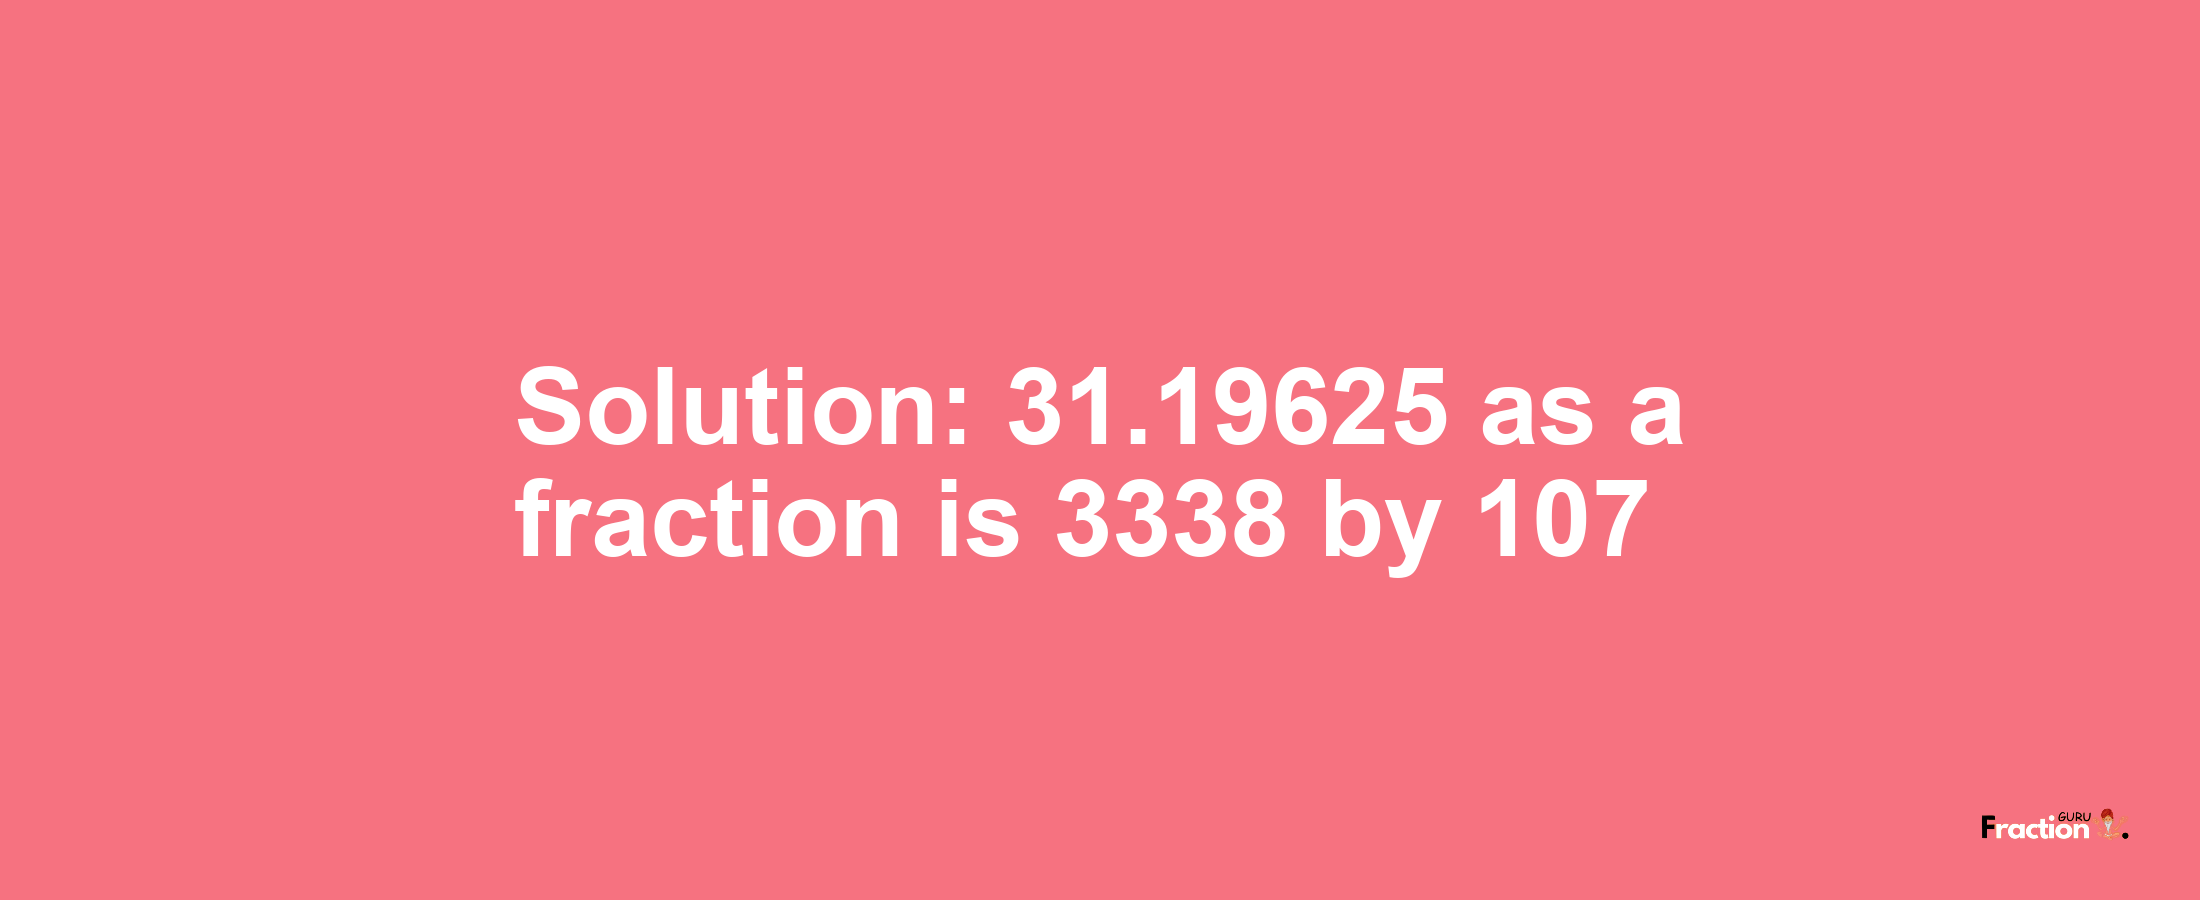 Solution:31.19625 as a fraction is 3338/107